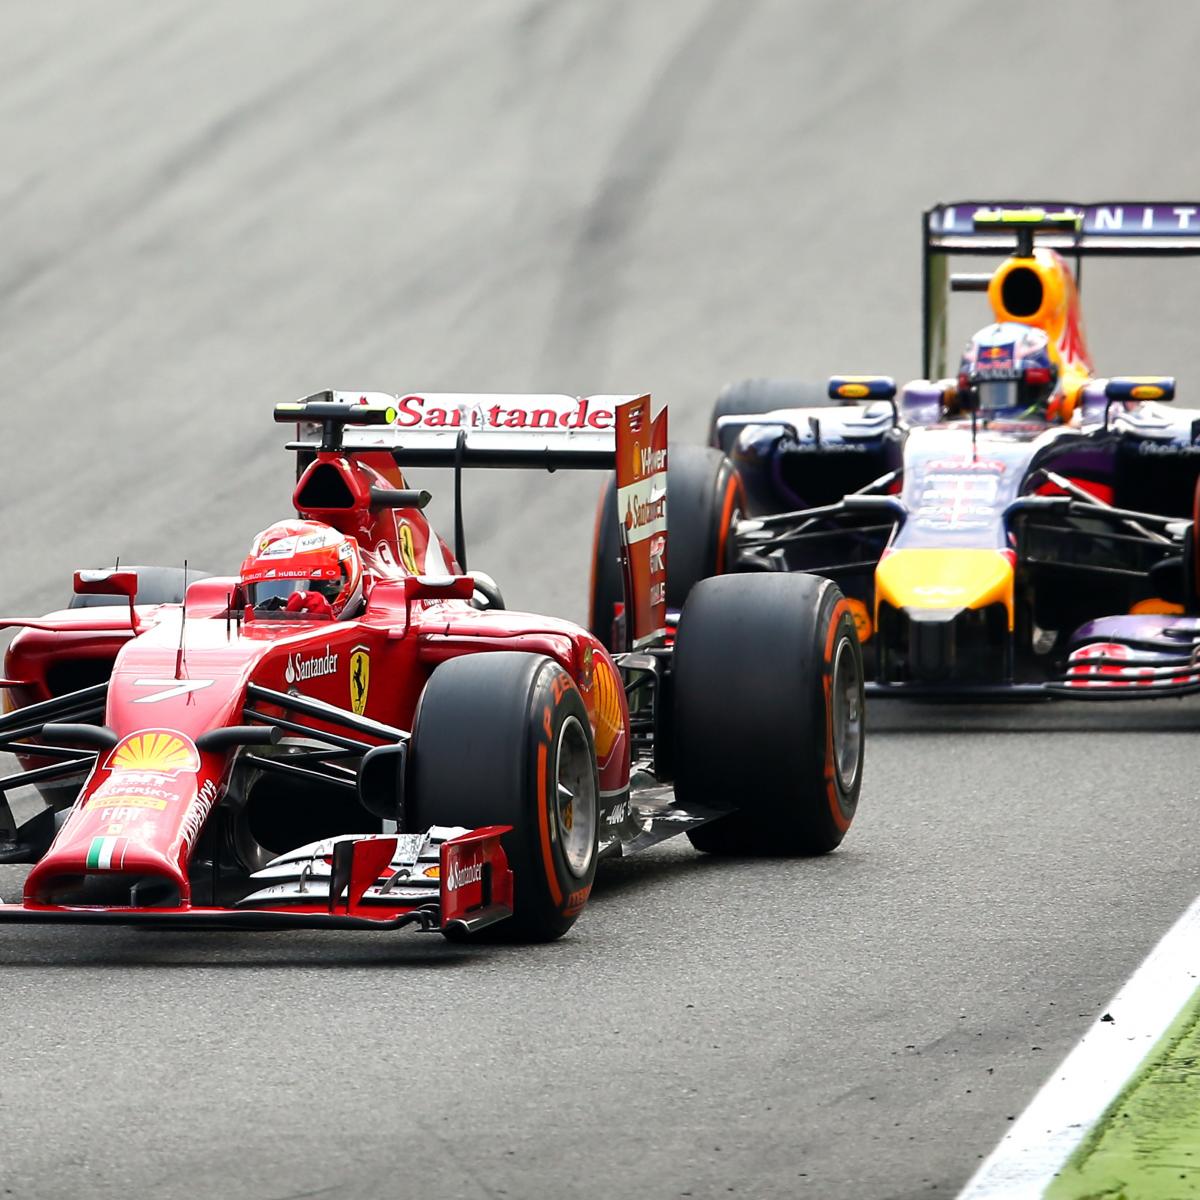 Formula 1 Prize Money Distribution Highlights Inequalities in the Sport ...